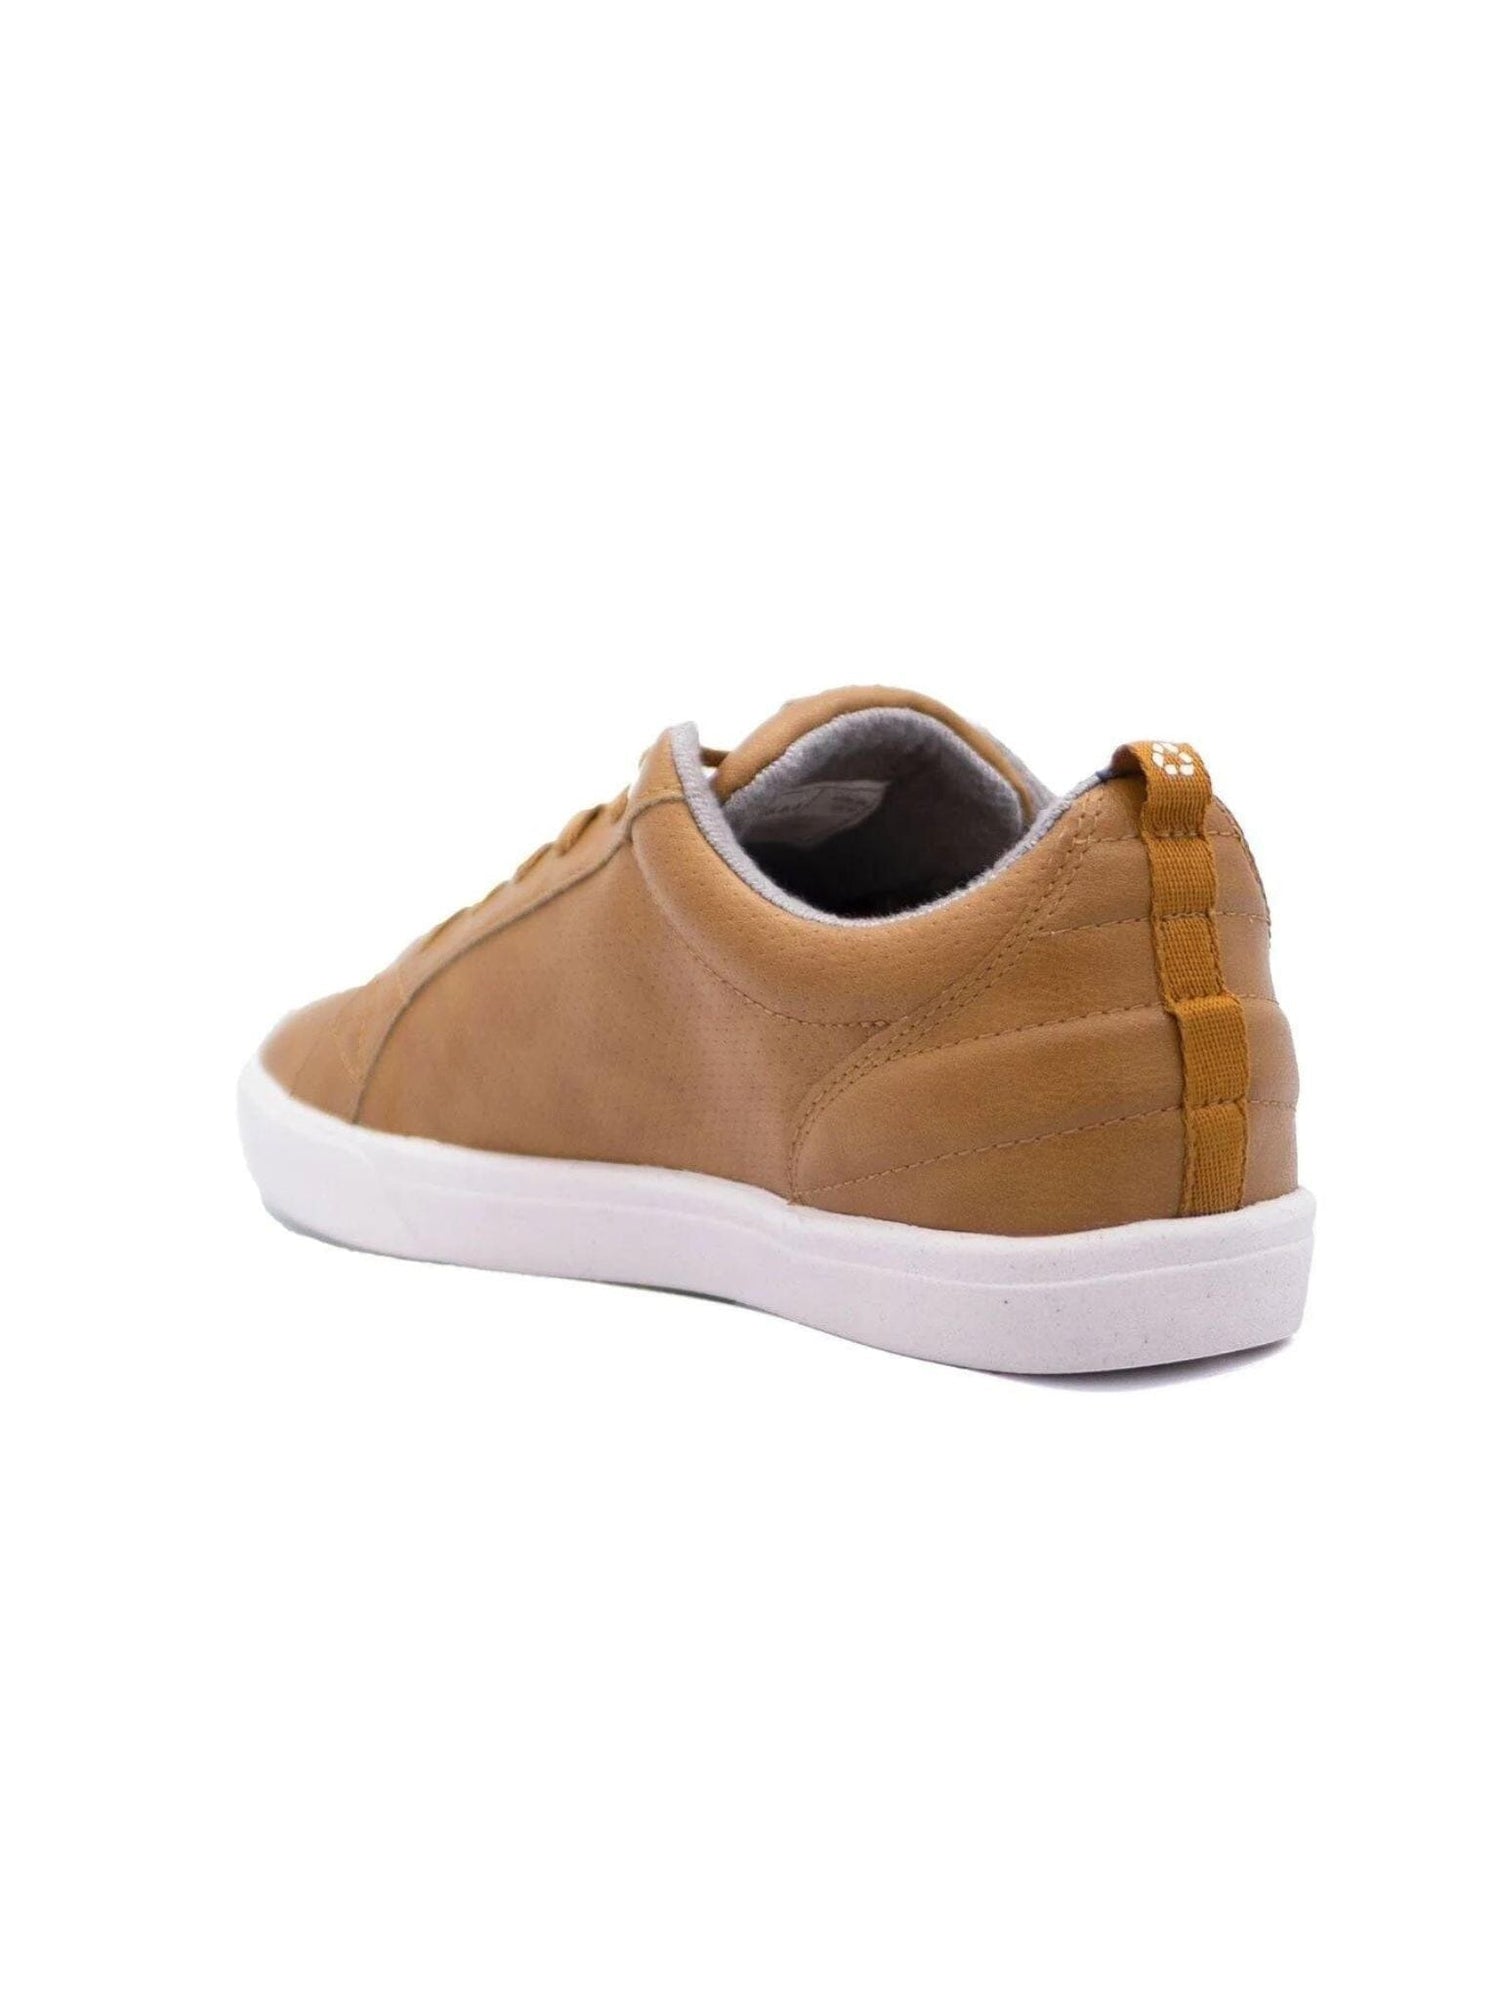 Saola W's Cannon Vegan Leather - Recycled PET Camel Shoes